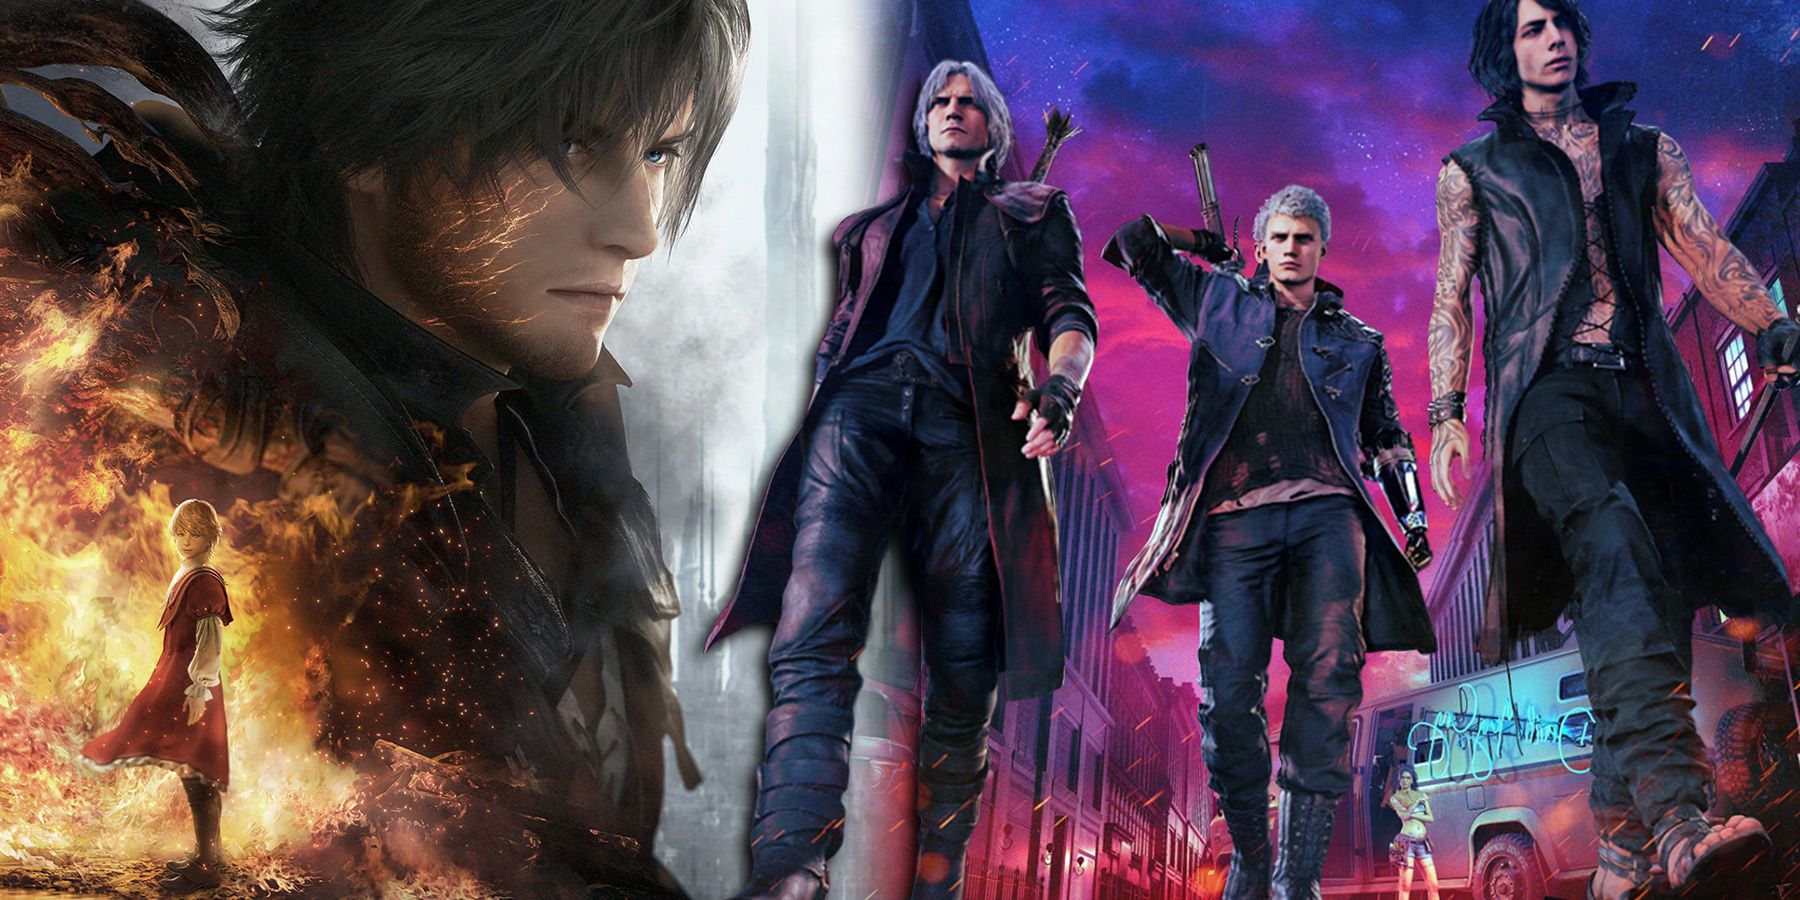 Final Fantasy 16 - Header Image For Combat Comparison Between FF16 and DMC